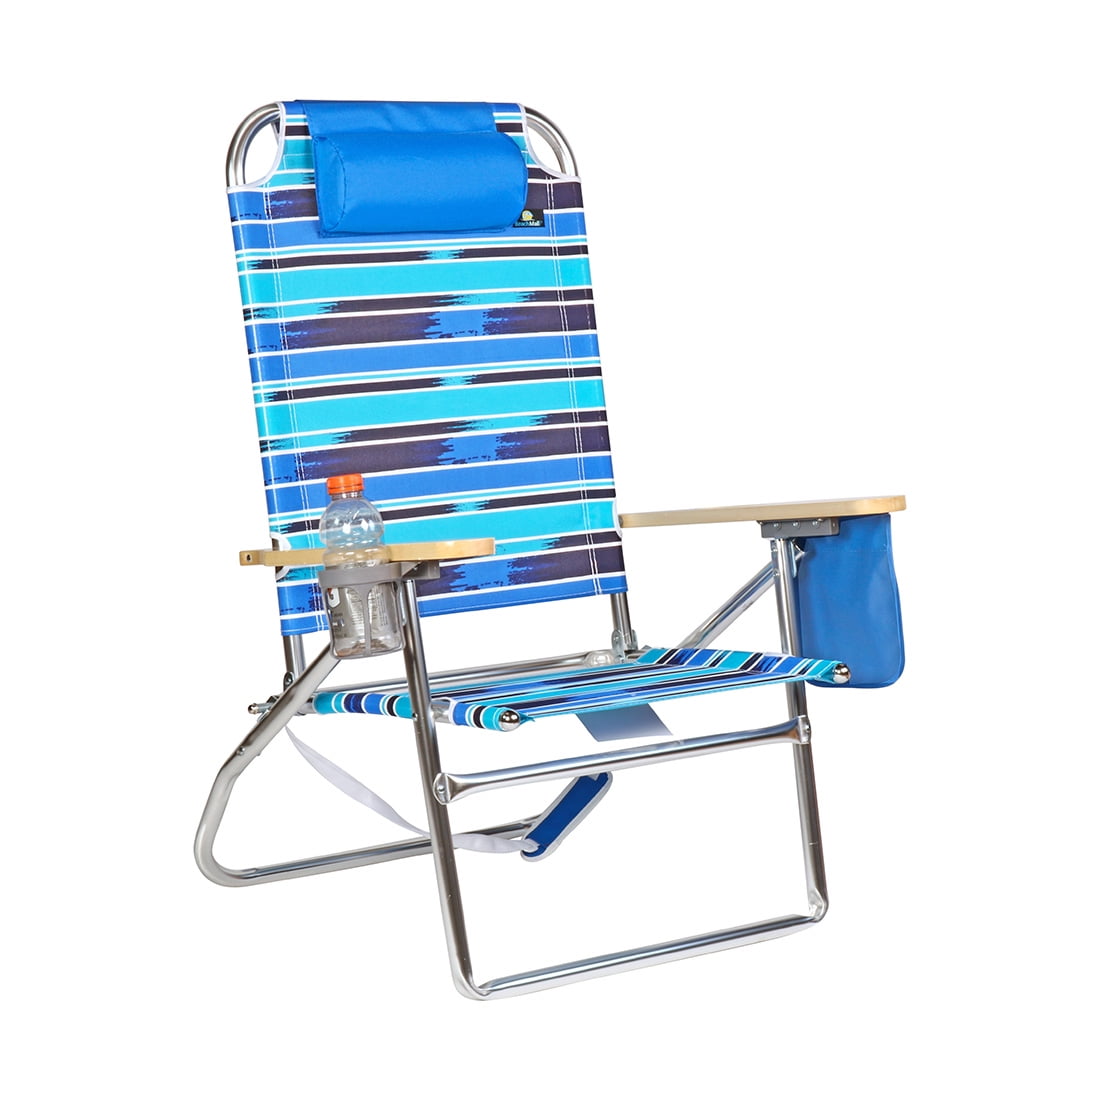 Creatice Wide Beach Chair for Small Space